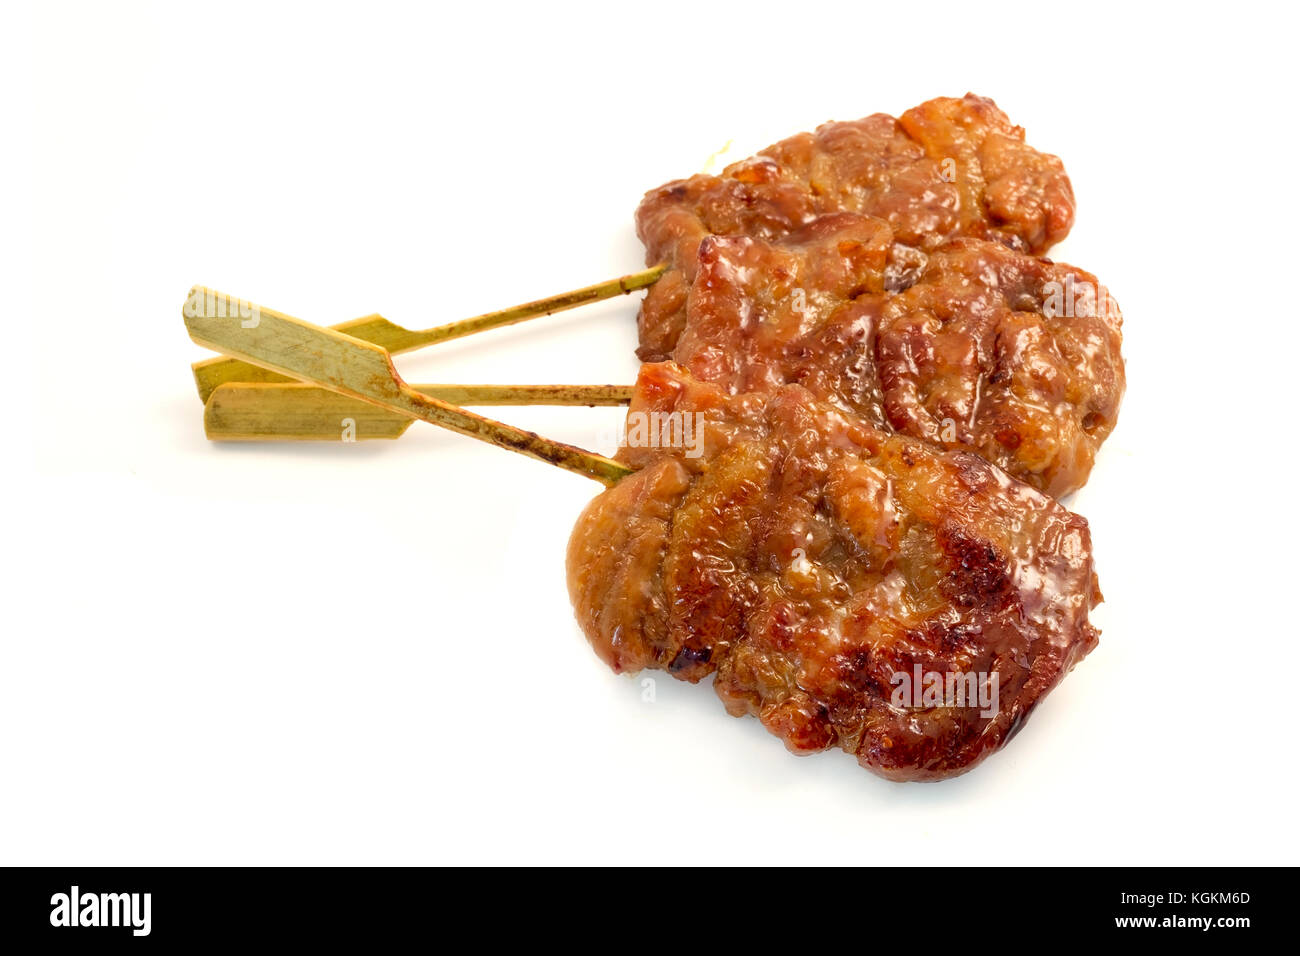 Moo Ping (Thai-style grilled pork on a skewer) on a white background Stock Photo